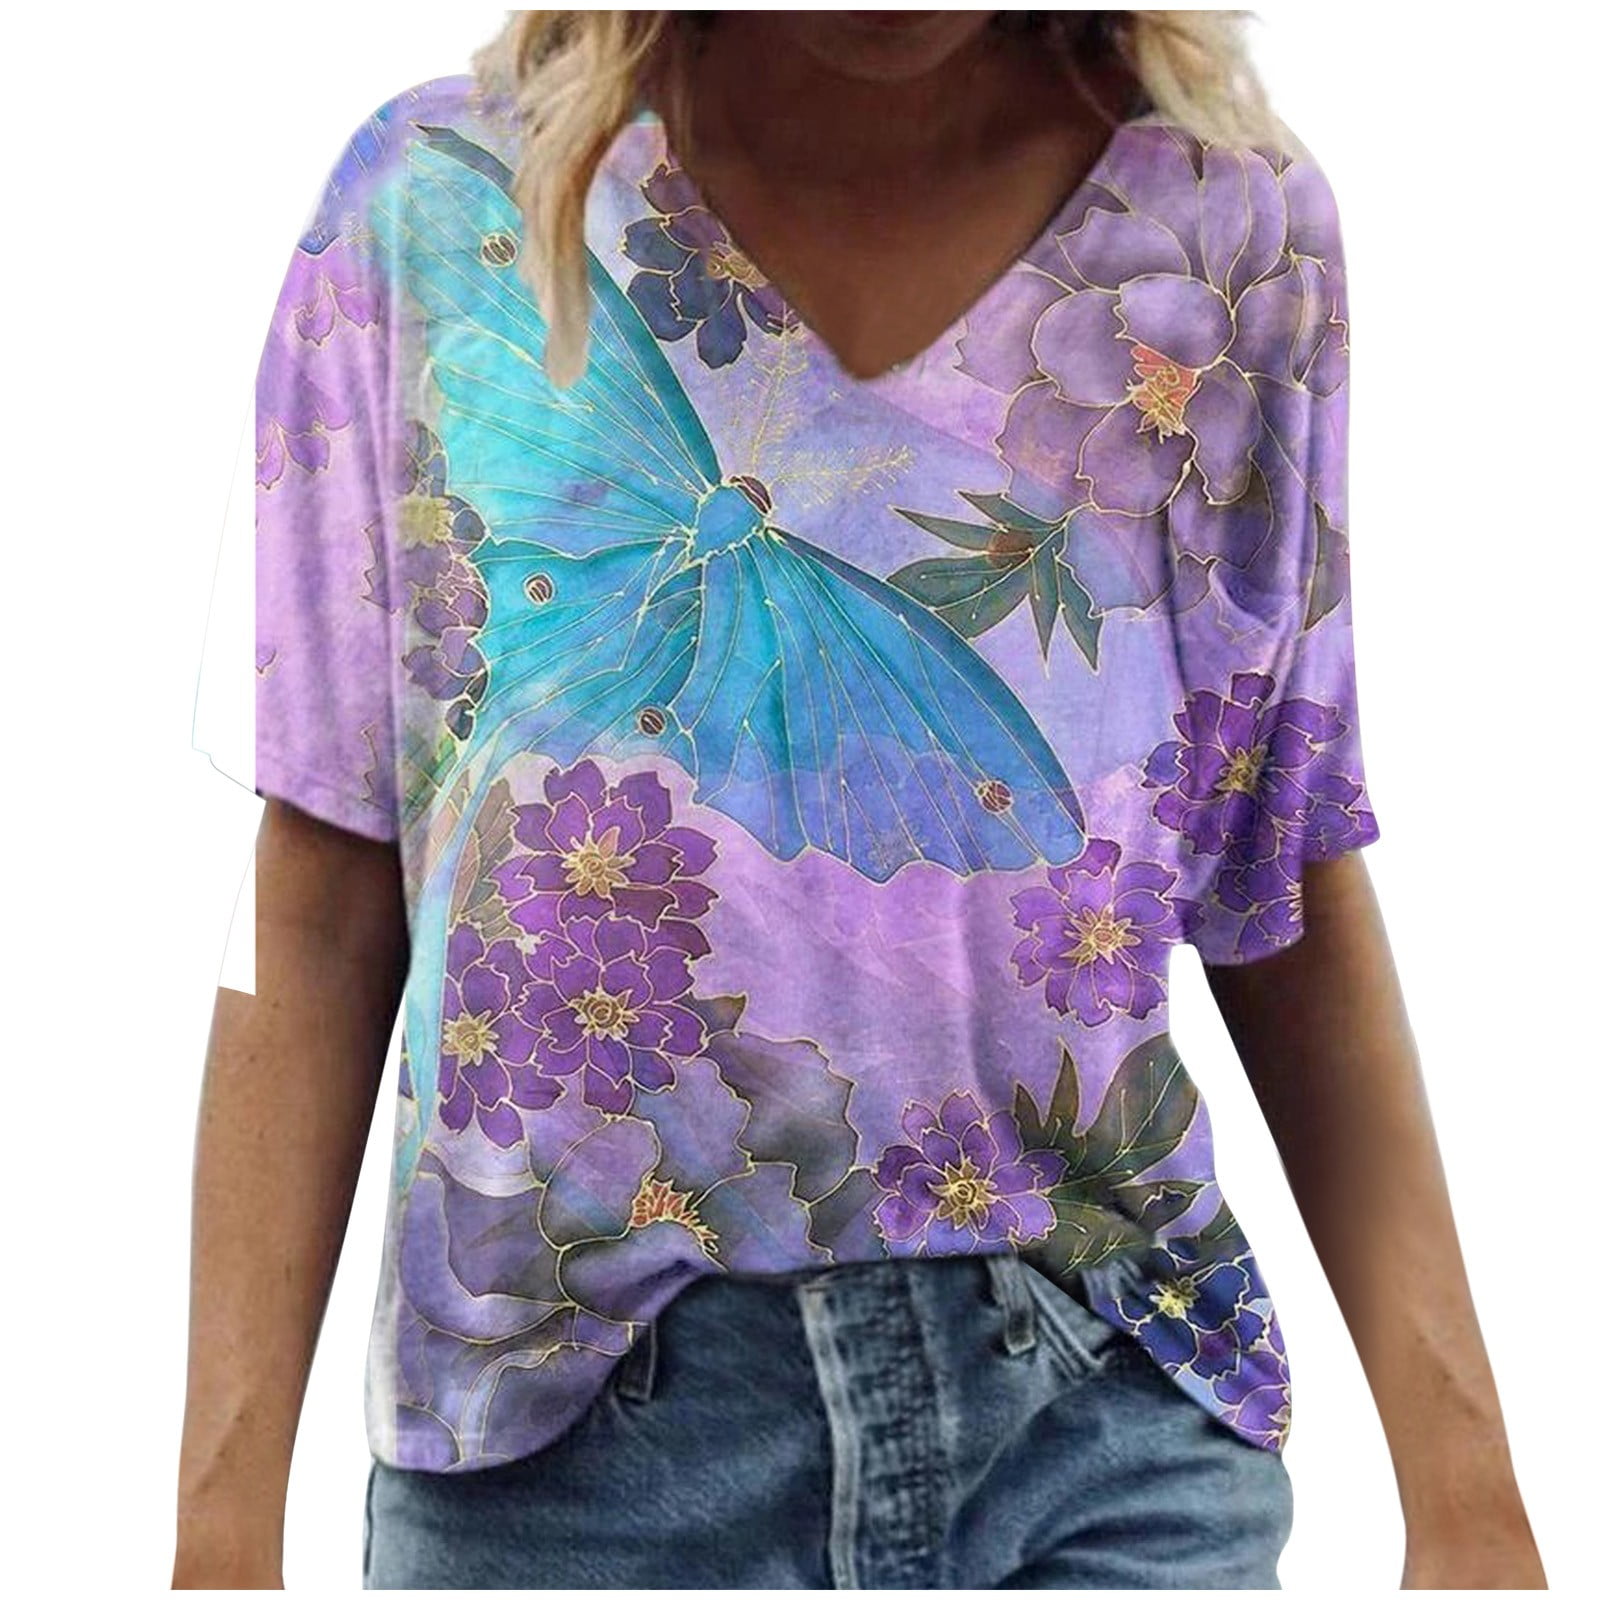 Plus Size Blouse for Women V-Neck Casual Floral Printed T-Shirt Short Sleeve Summer Tunic Tops Cute Tee 